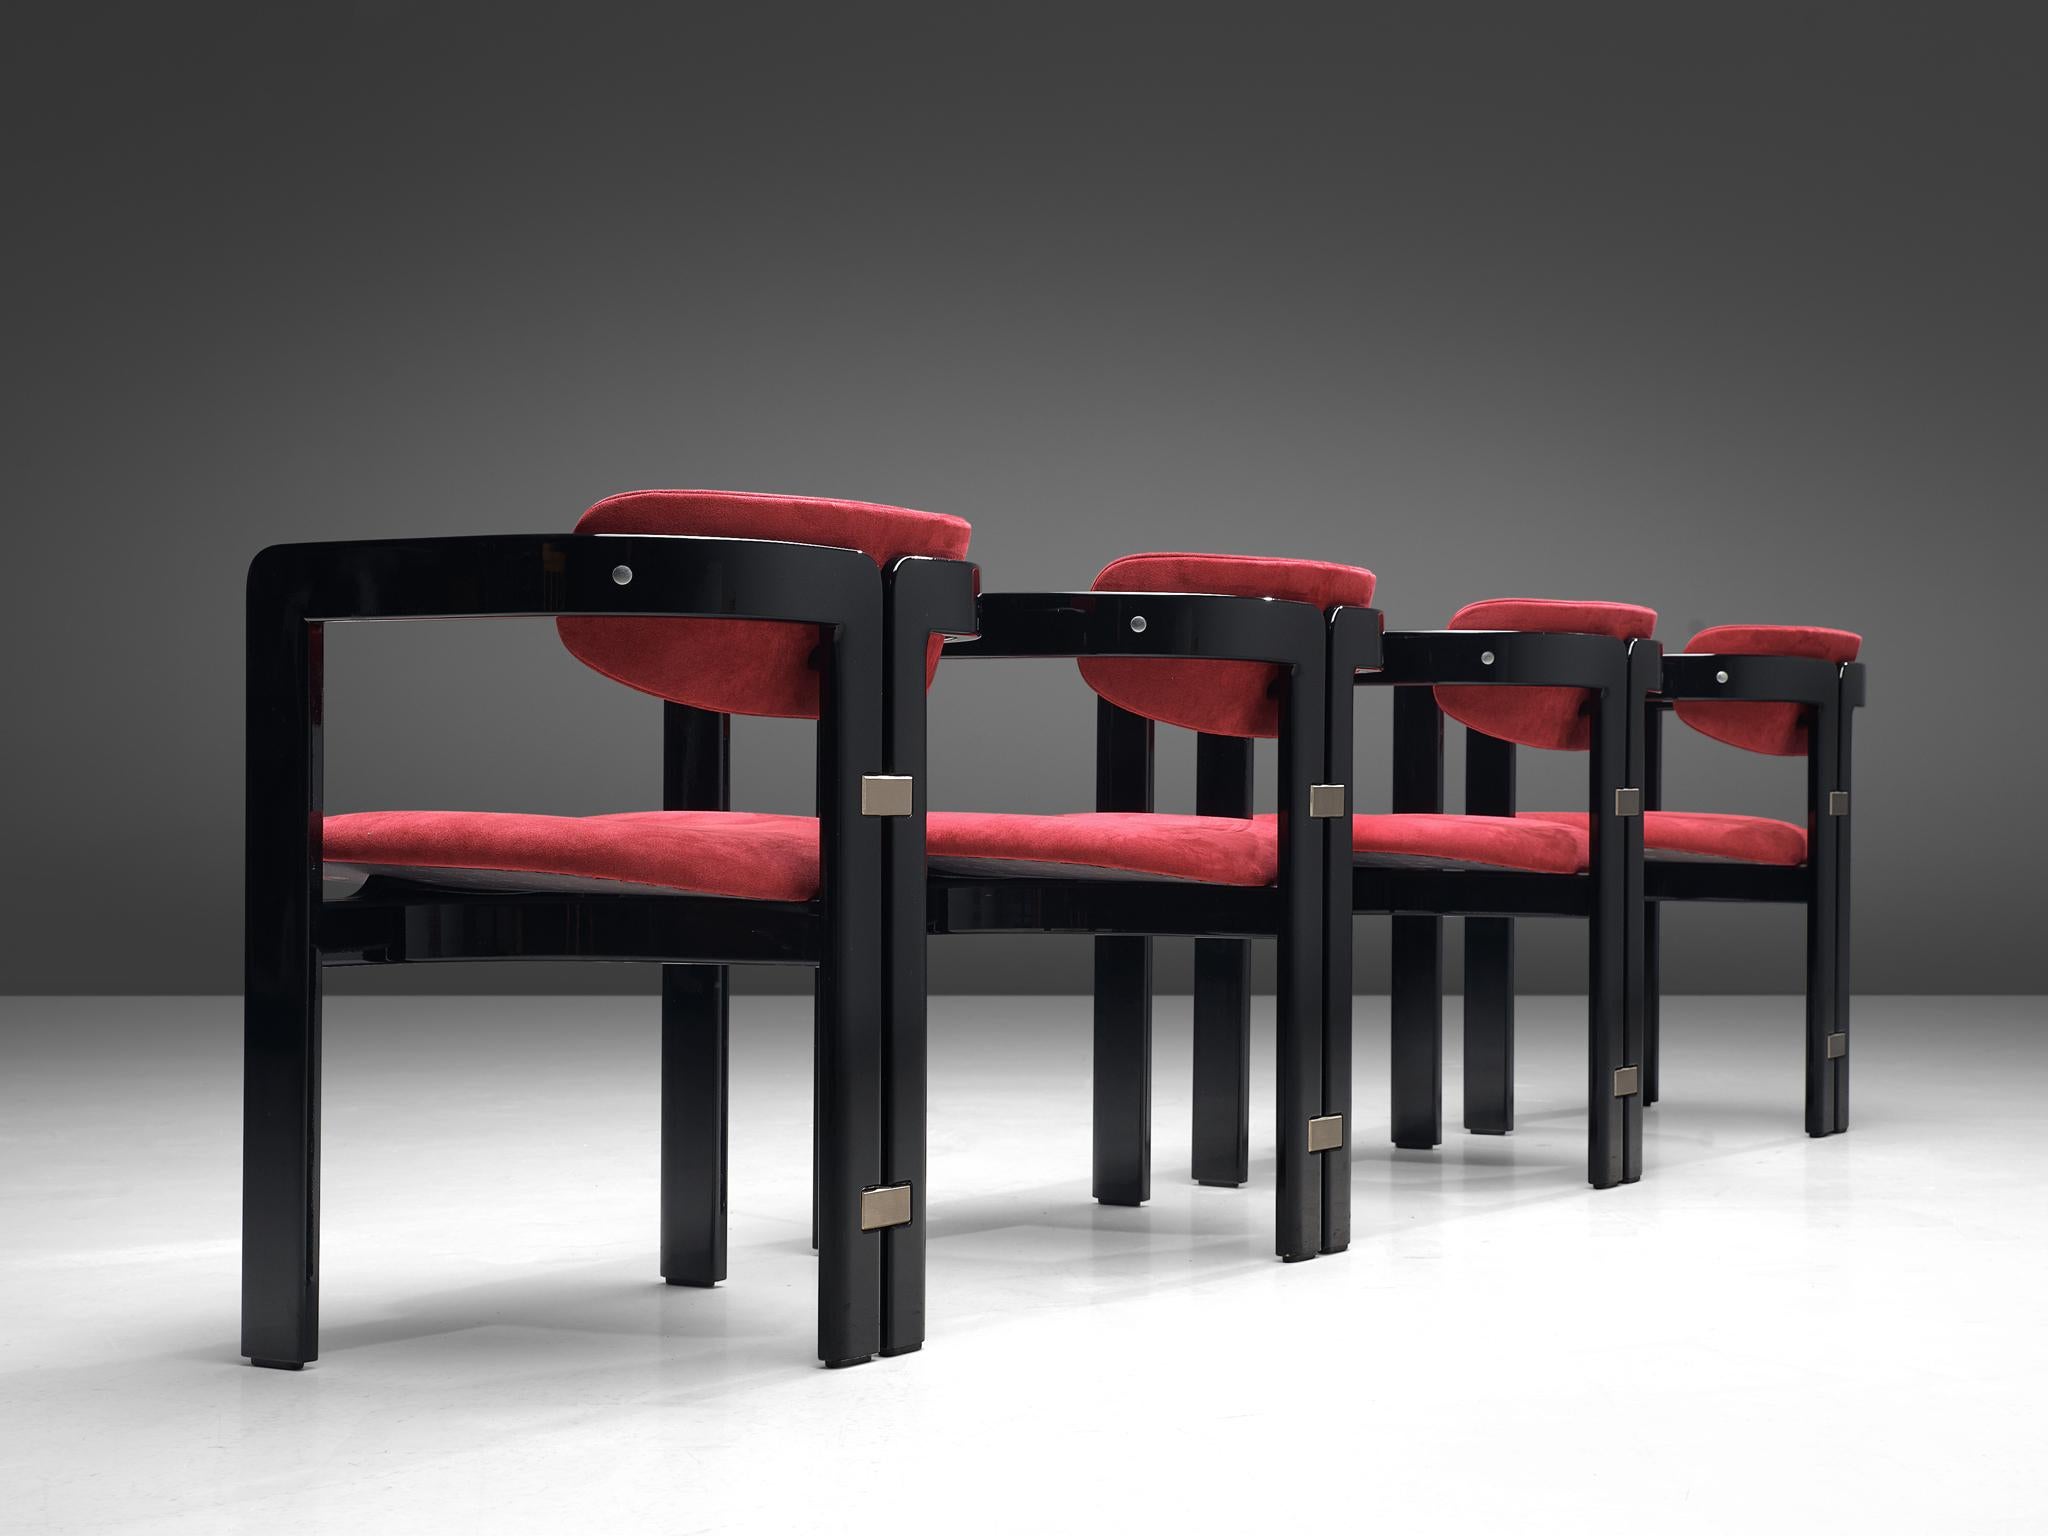 Augusto Savini, set of four 'Pamplona' dining room chairs, ebonized ashwood and red fabric, by for Pozzi, Italy, 1965.

Set of four armchairs in black lacquered ash and red suede inspired upholstery. A characteristic design; simplistic yet very